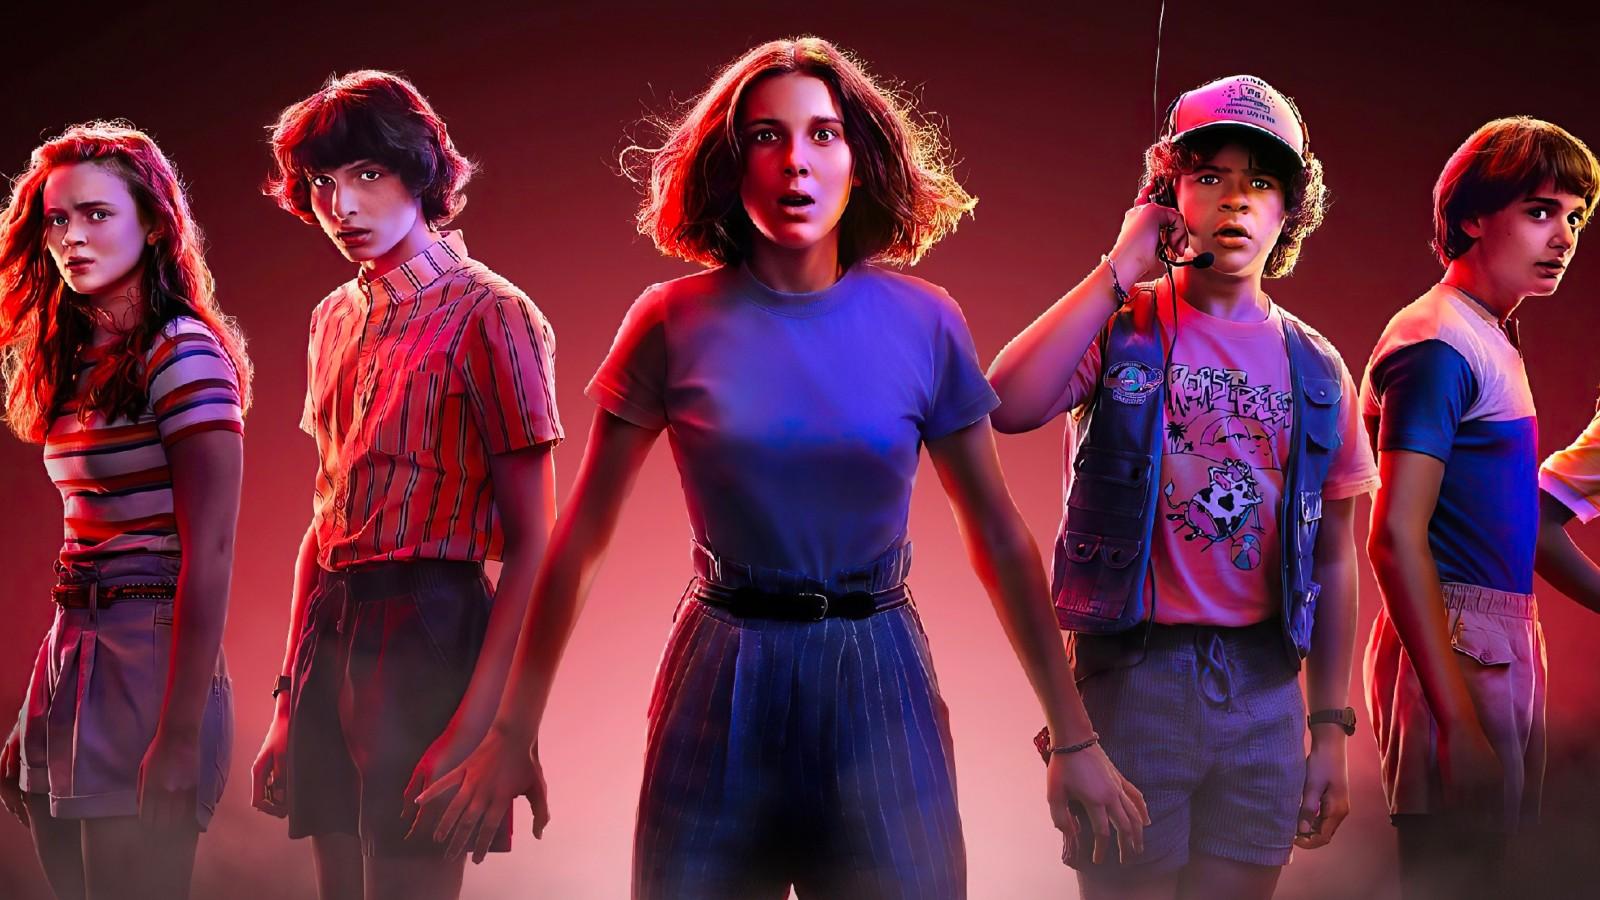 Netflix Announces Stranger Things Play Coming to London's West End